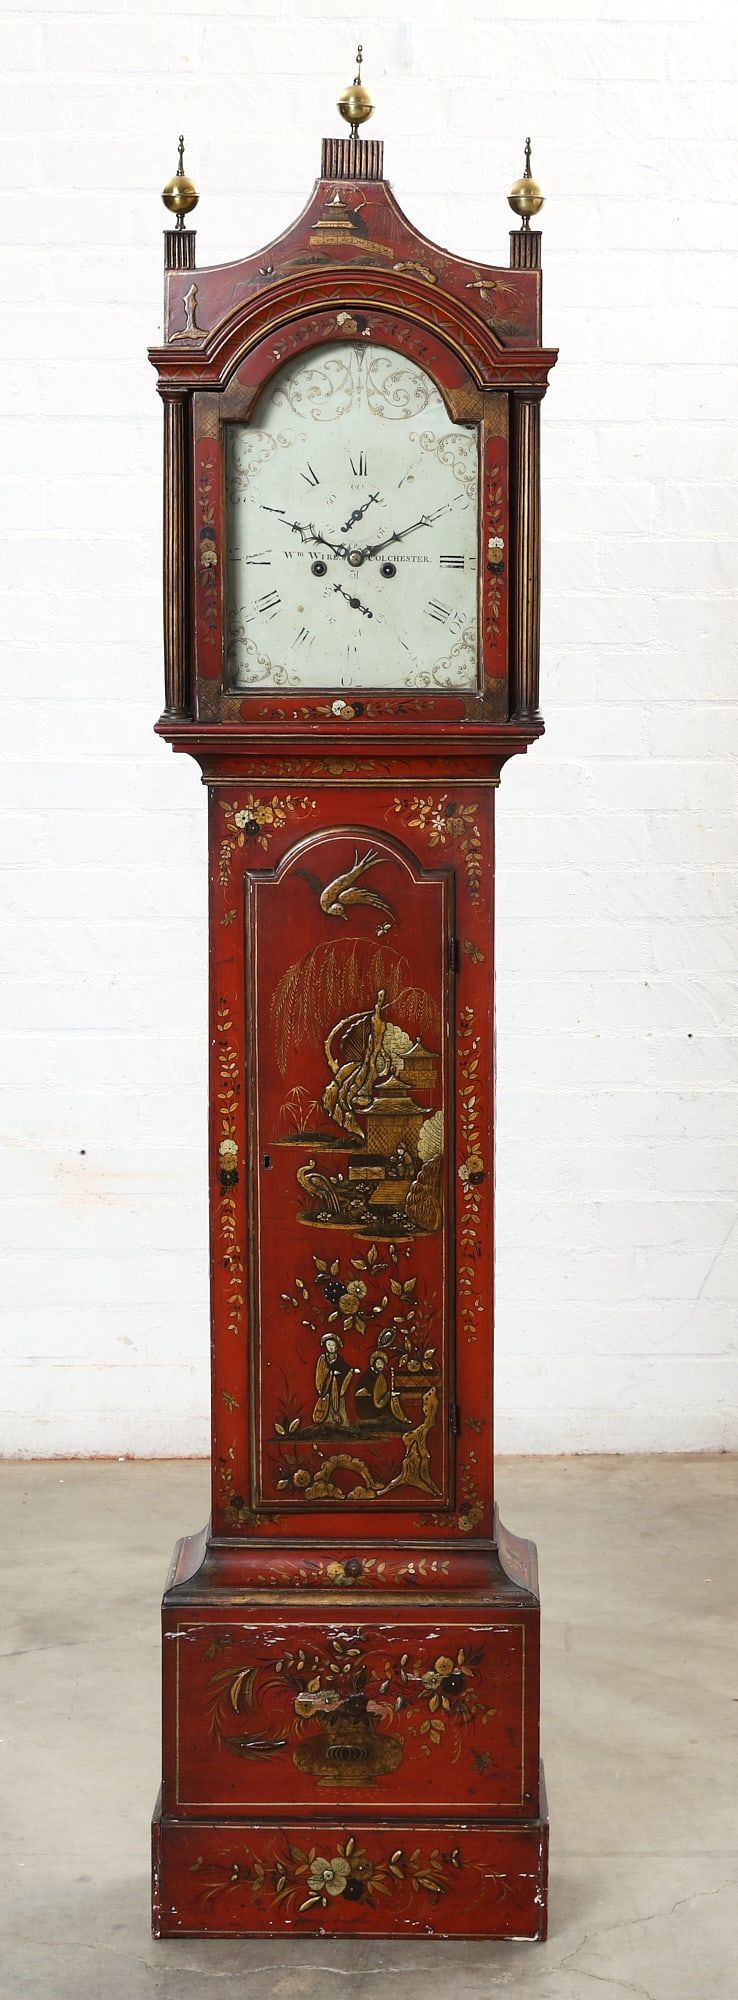 A GEORGE II JAPANNED TALL CASE 2fb2dc9